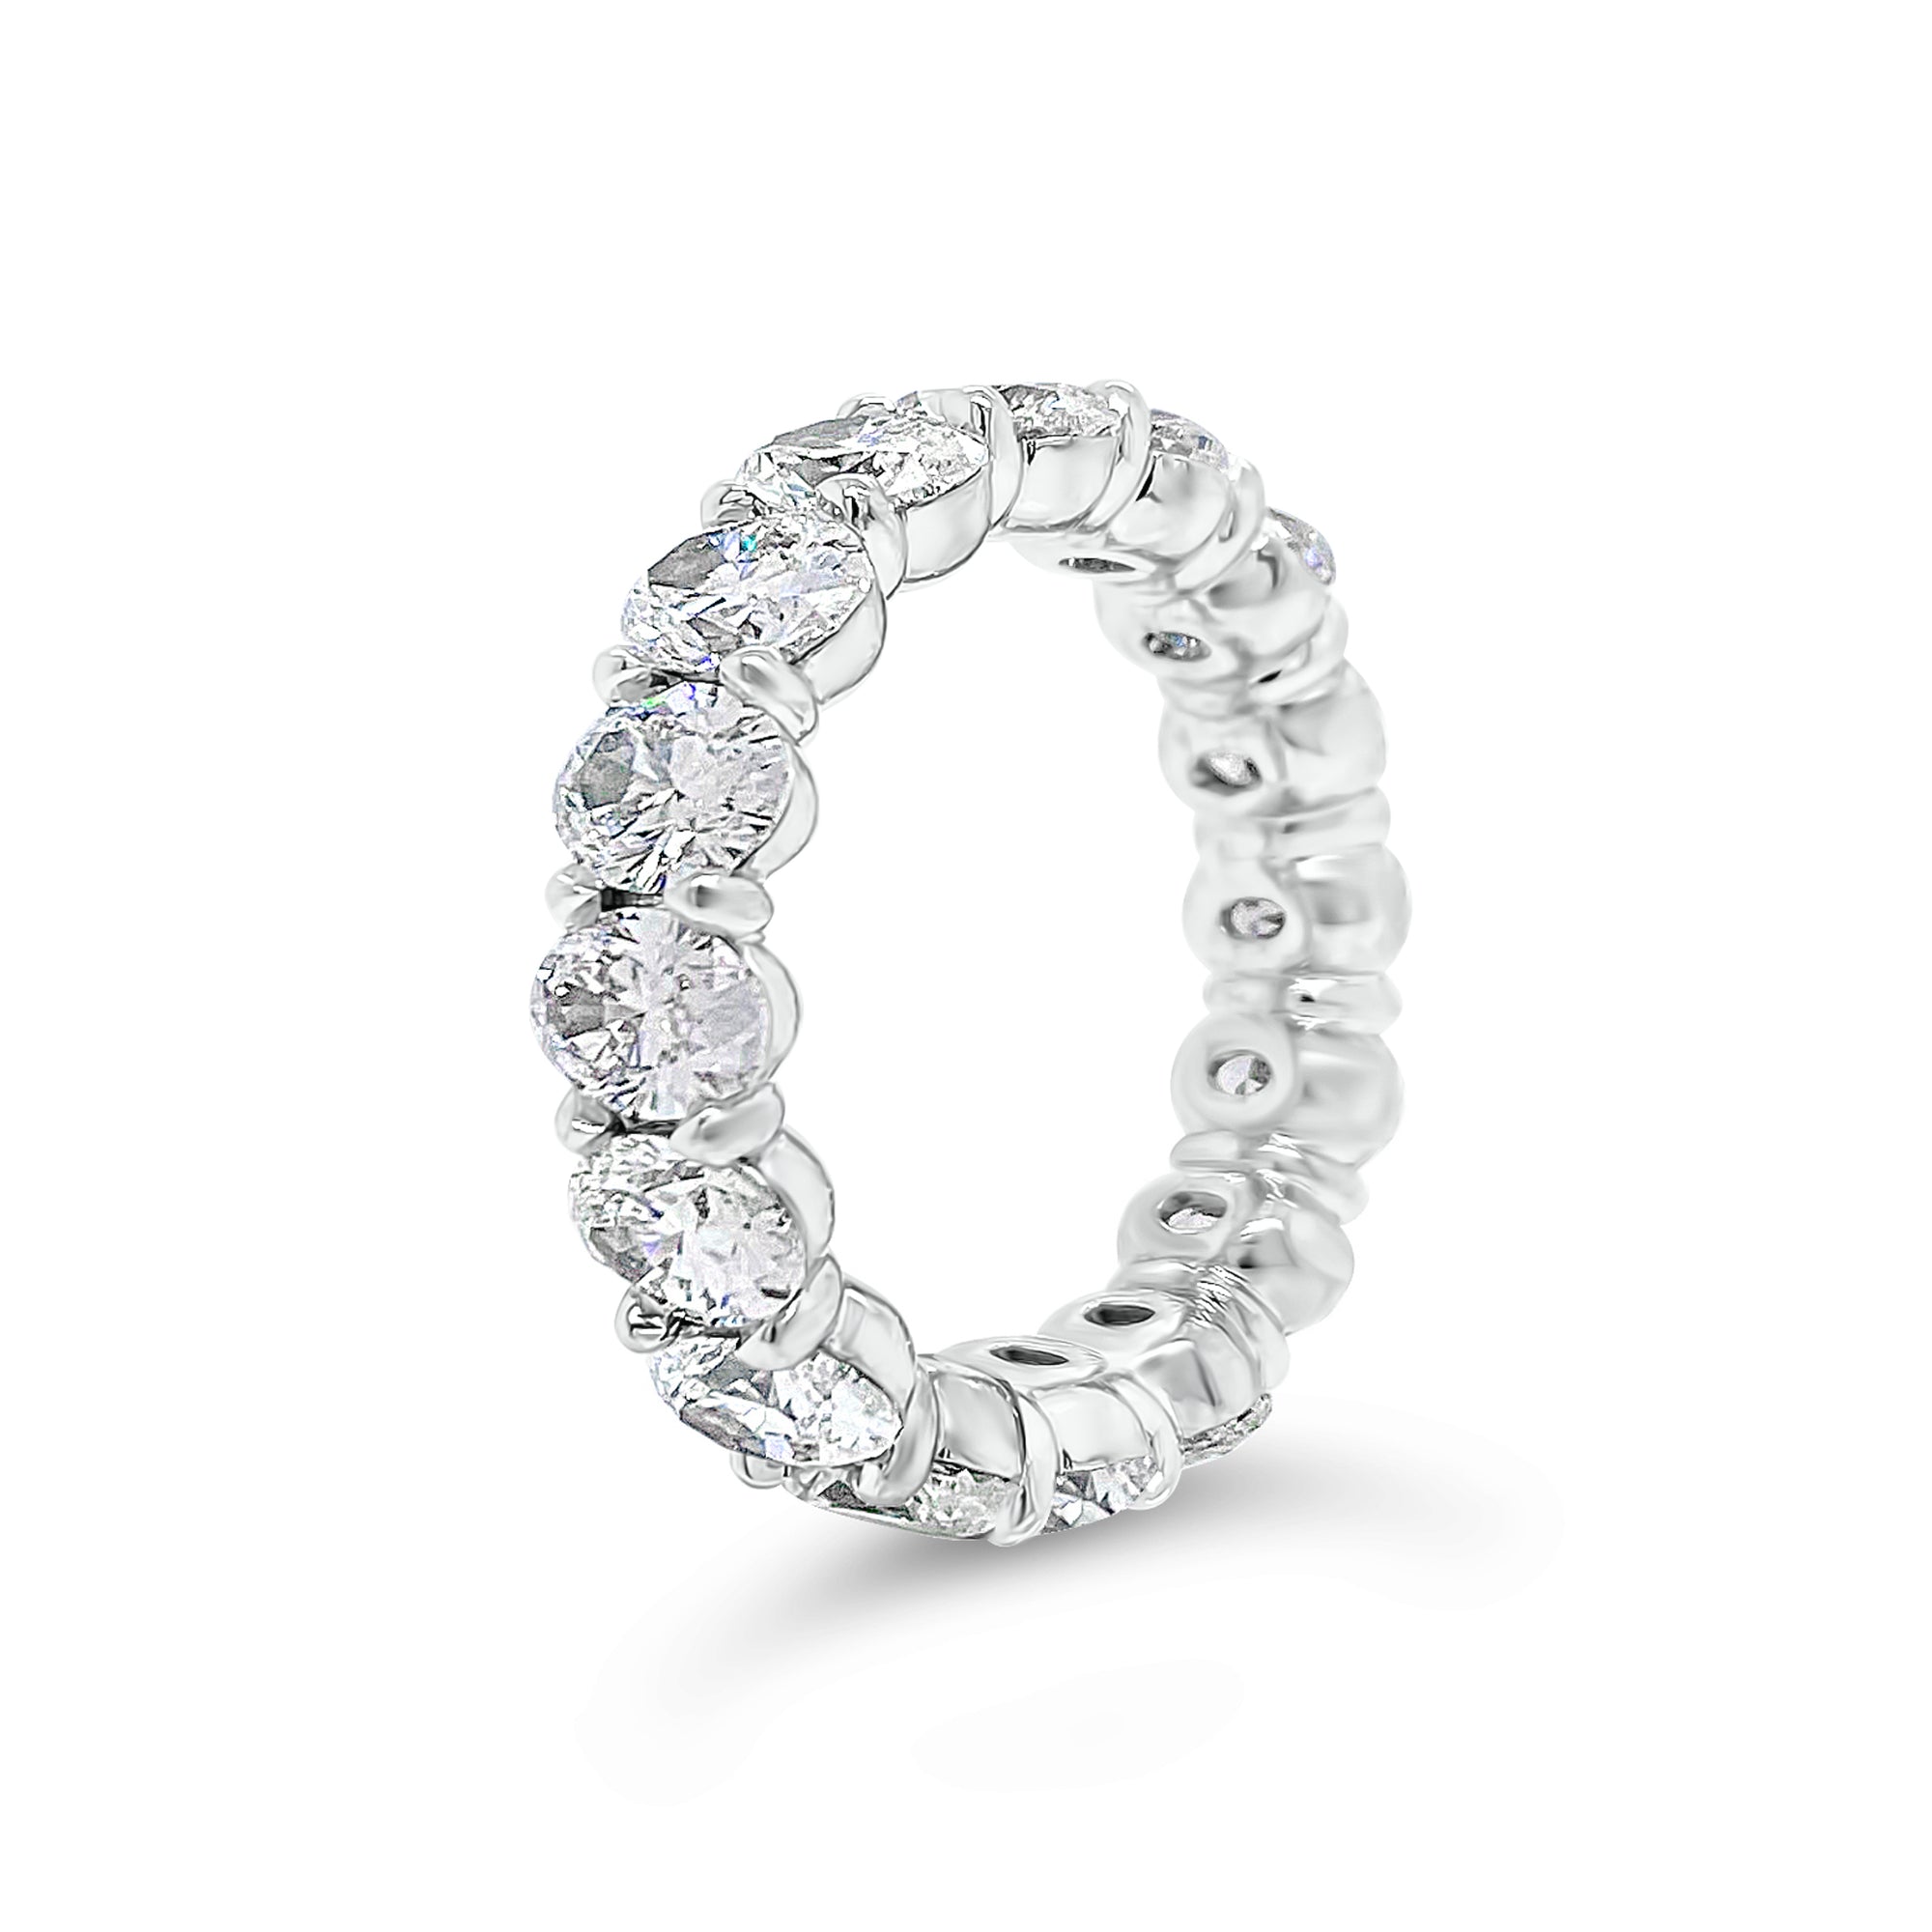 Diamond Ovals Wedding Band - Platinum white gold weighing 8.0 grams - F-color, VS2-SI1 clarity